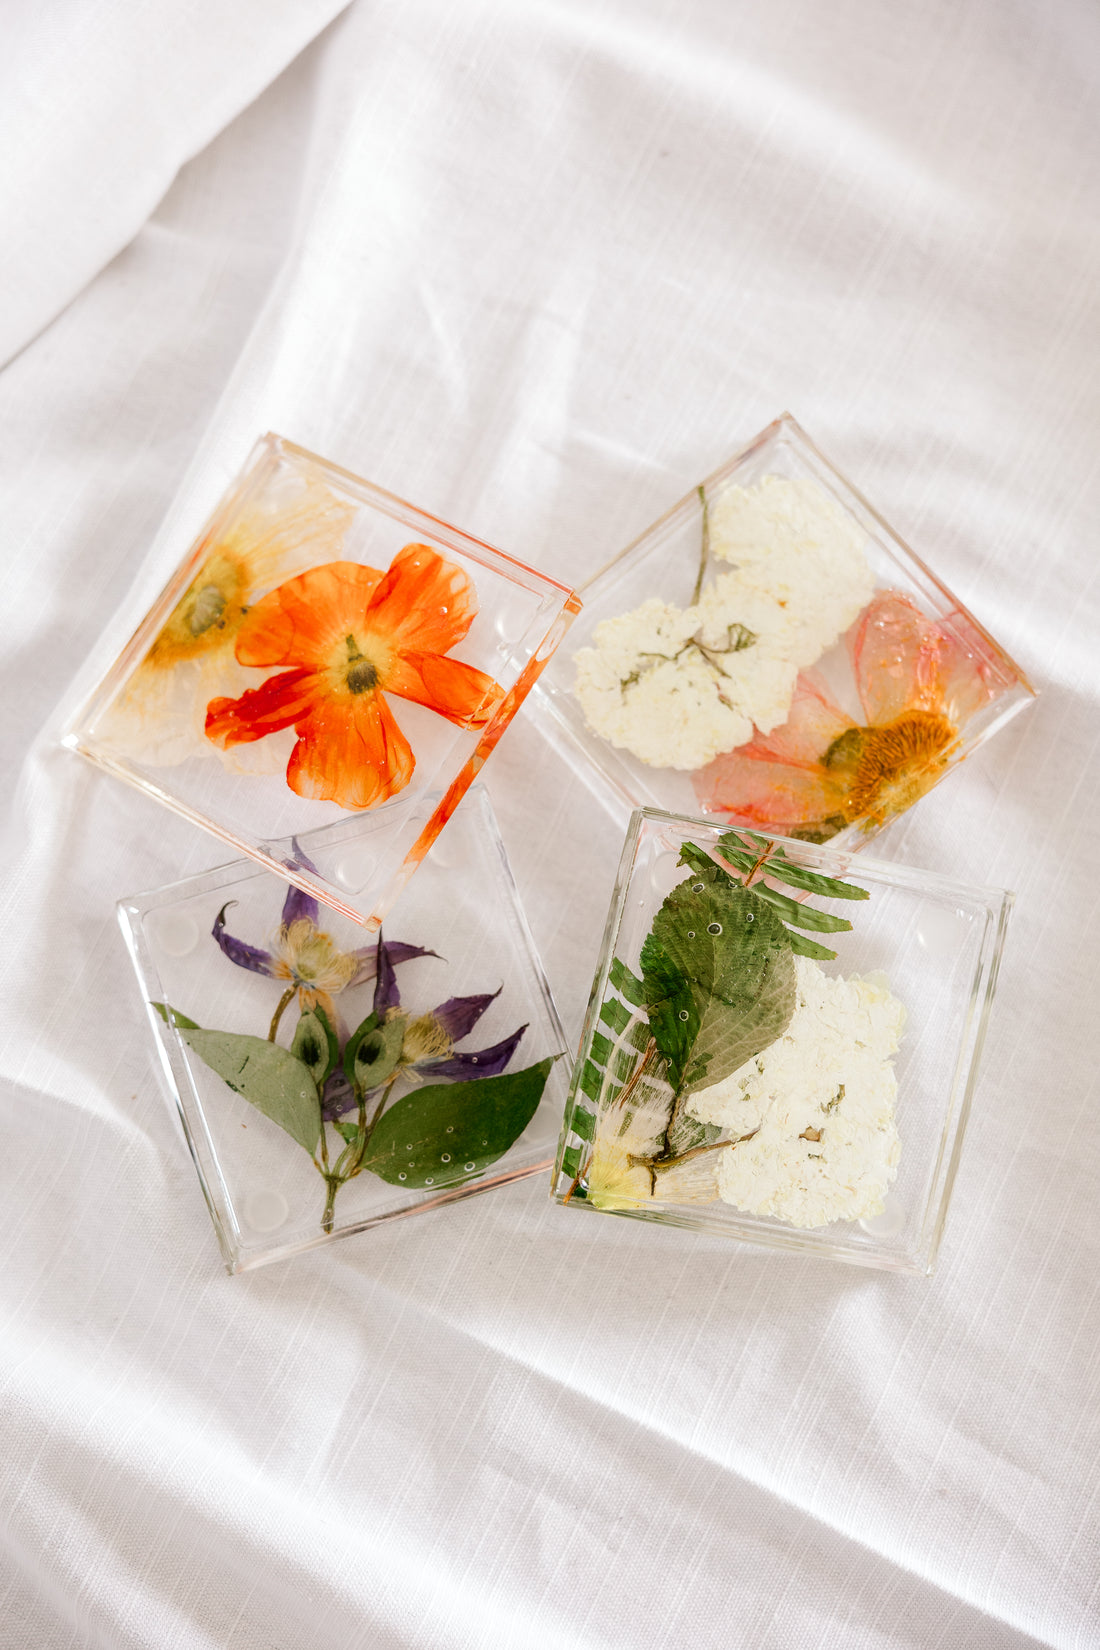 Our Guide to Resin For Beginners: Make Dried Flower Coasters